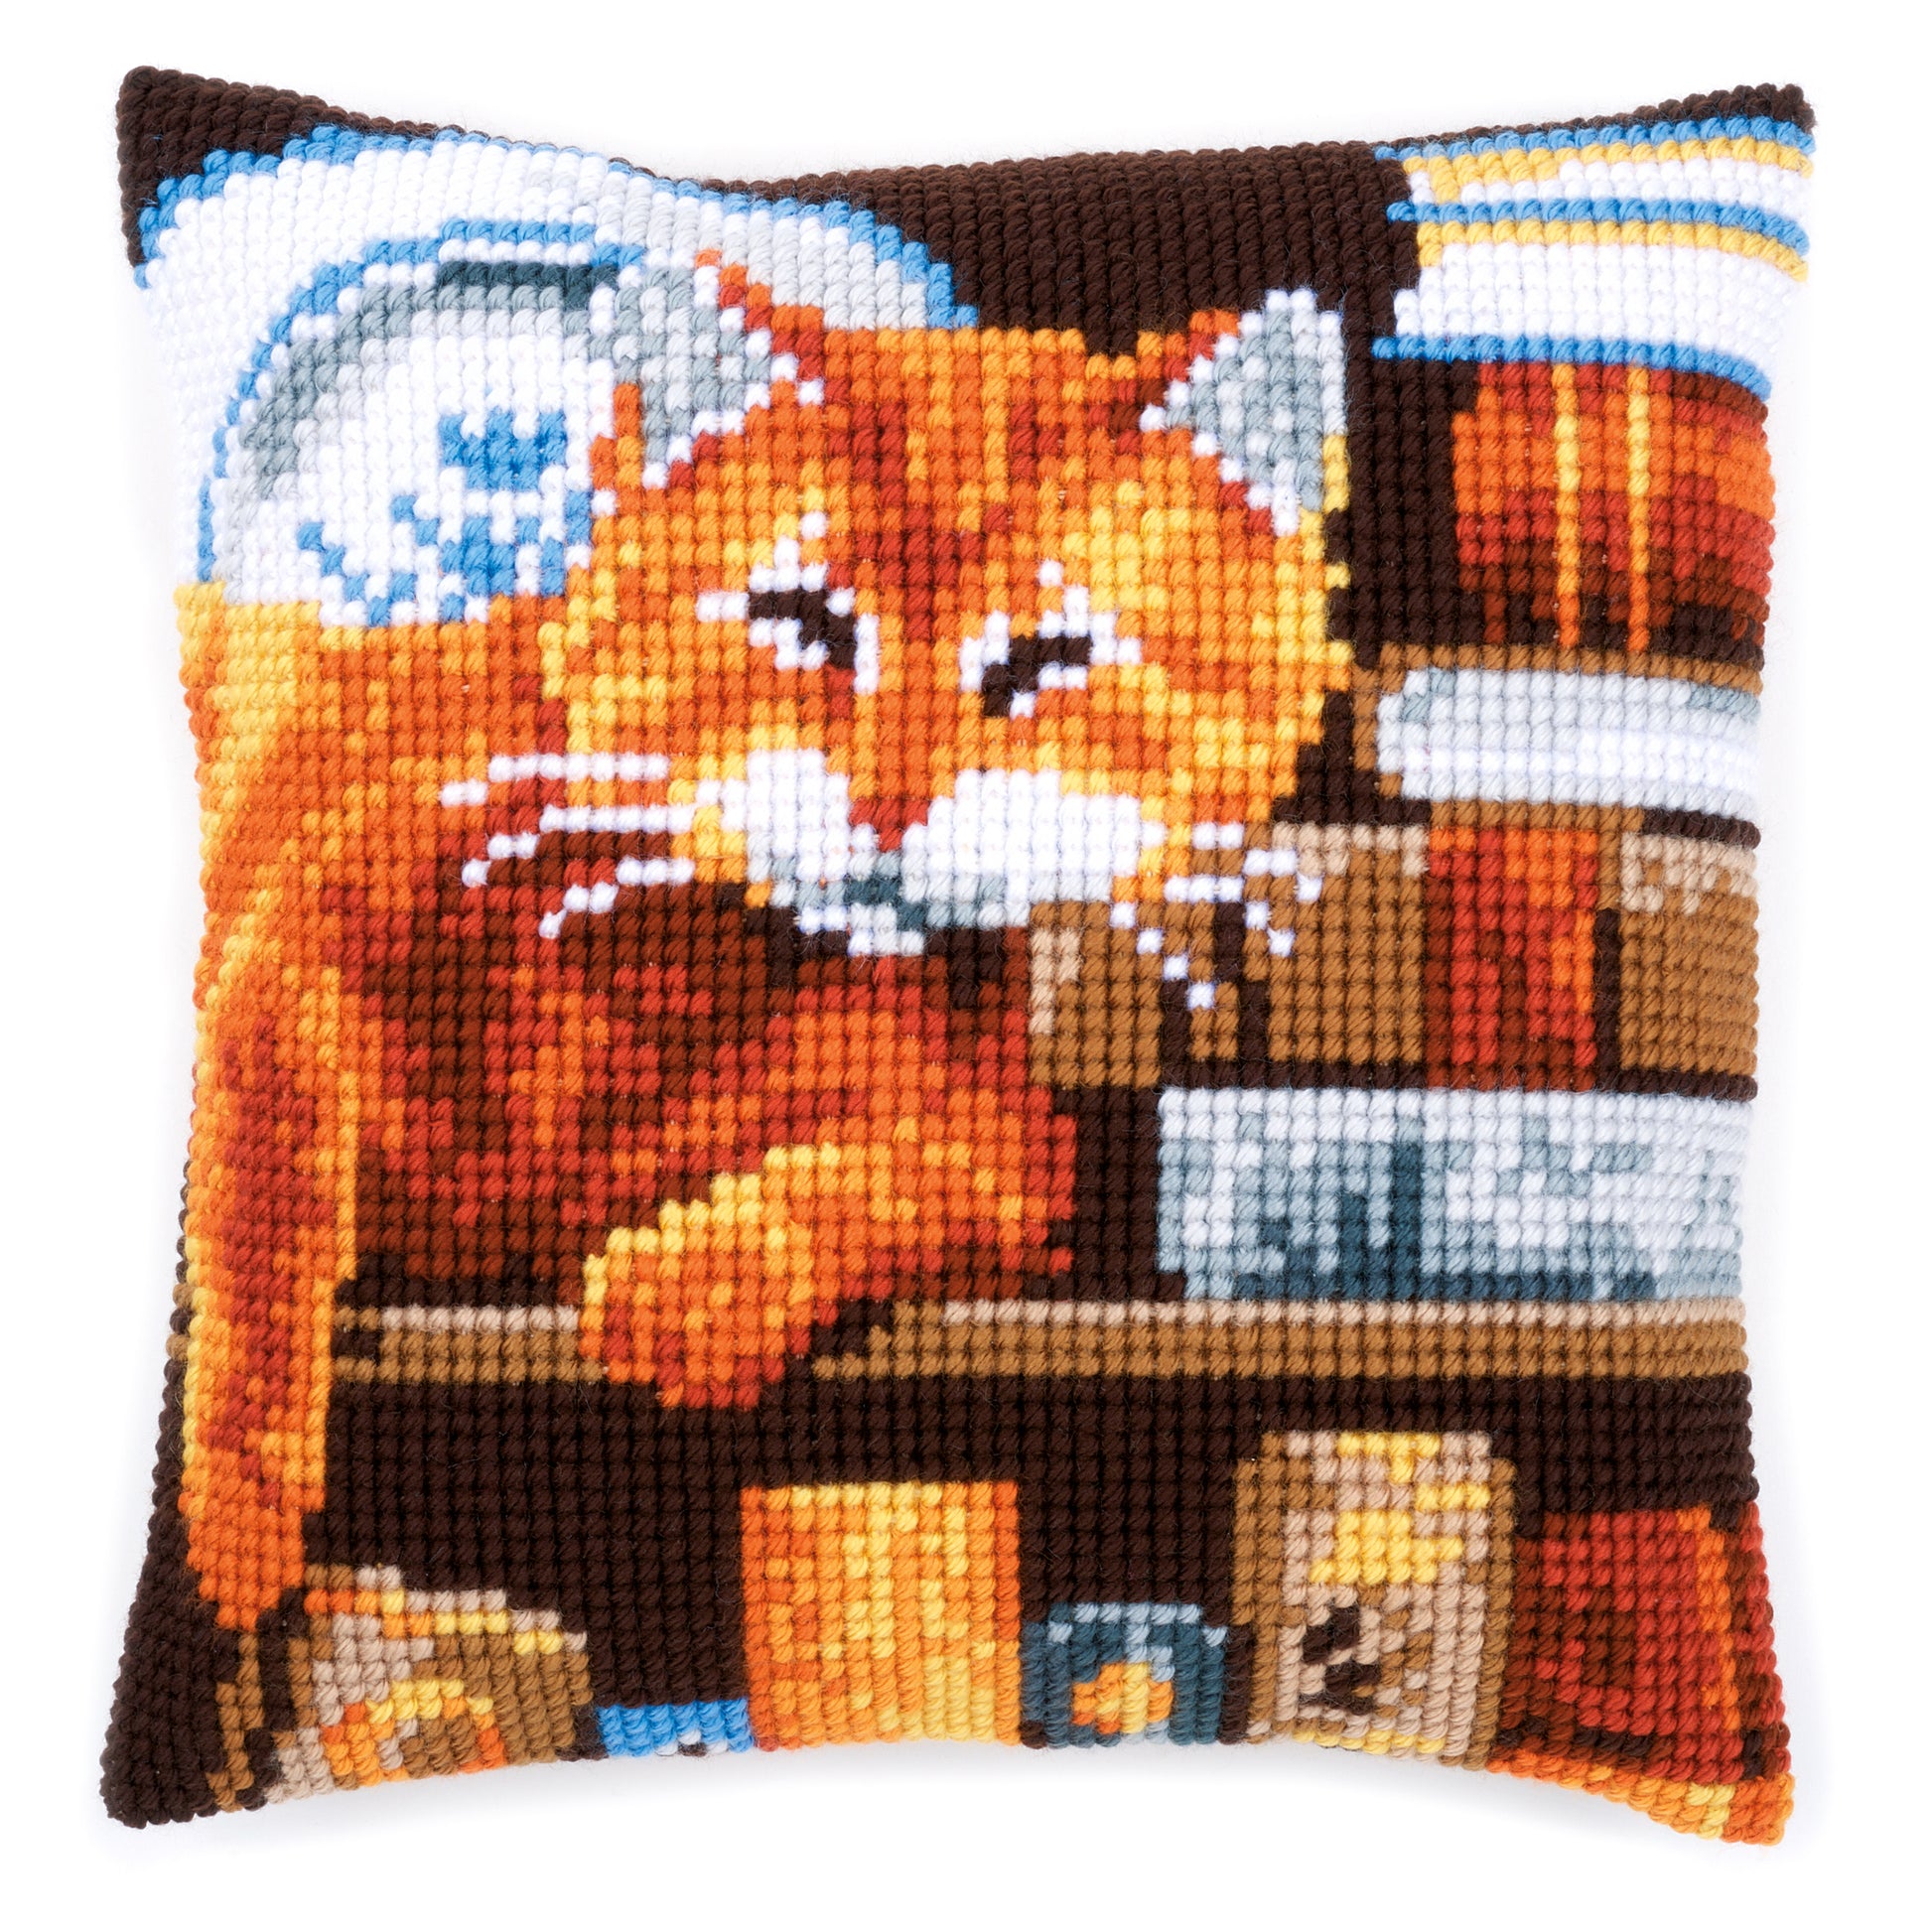 Cat and Books Printed Cross Stitch Cushion Kit by Vervaco